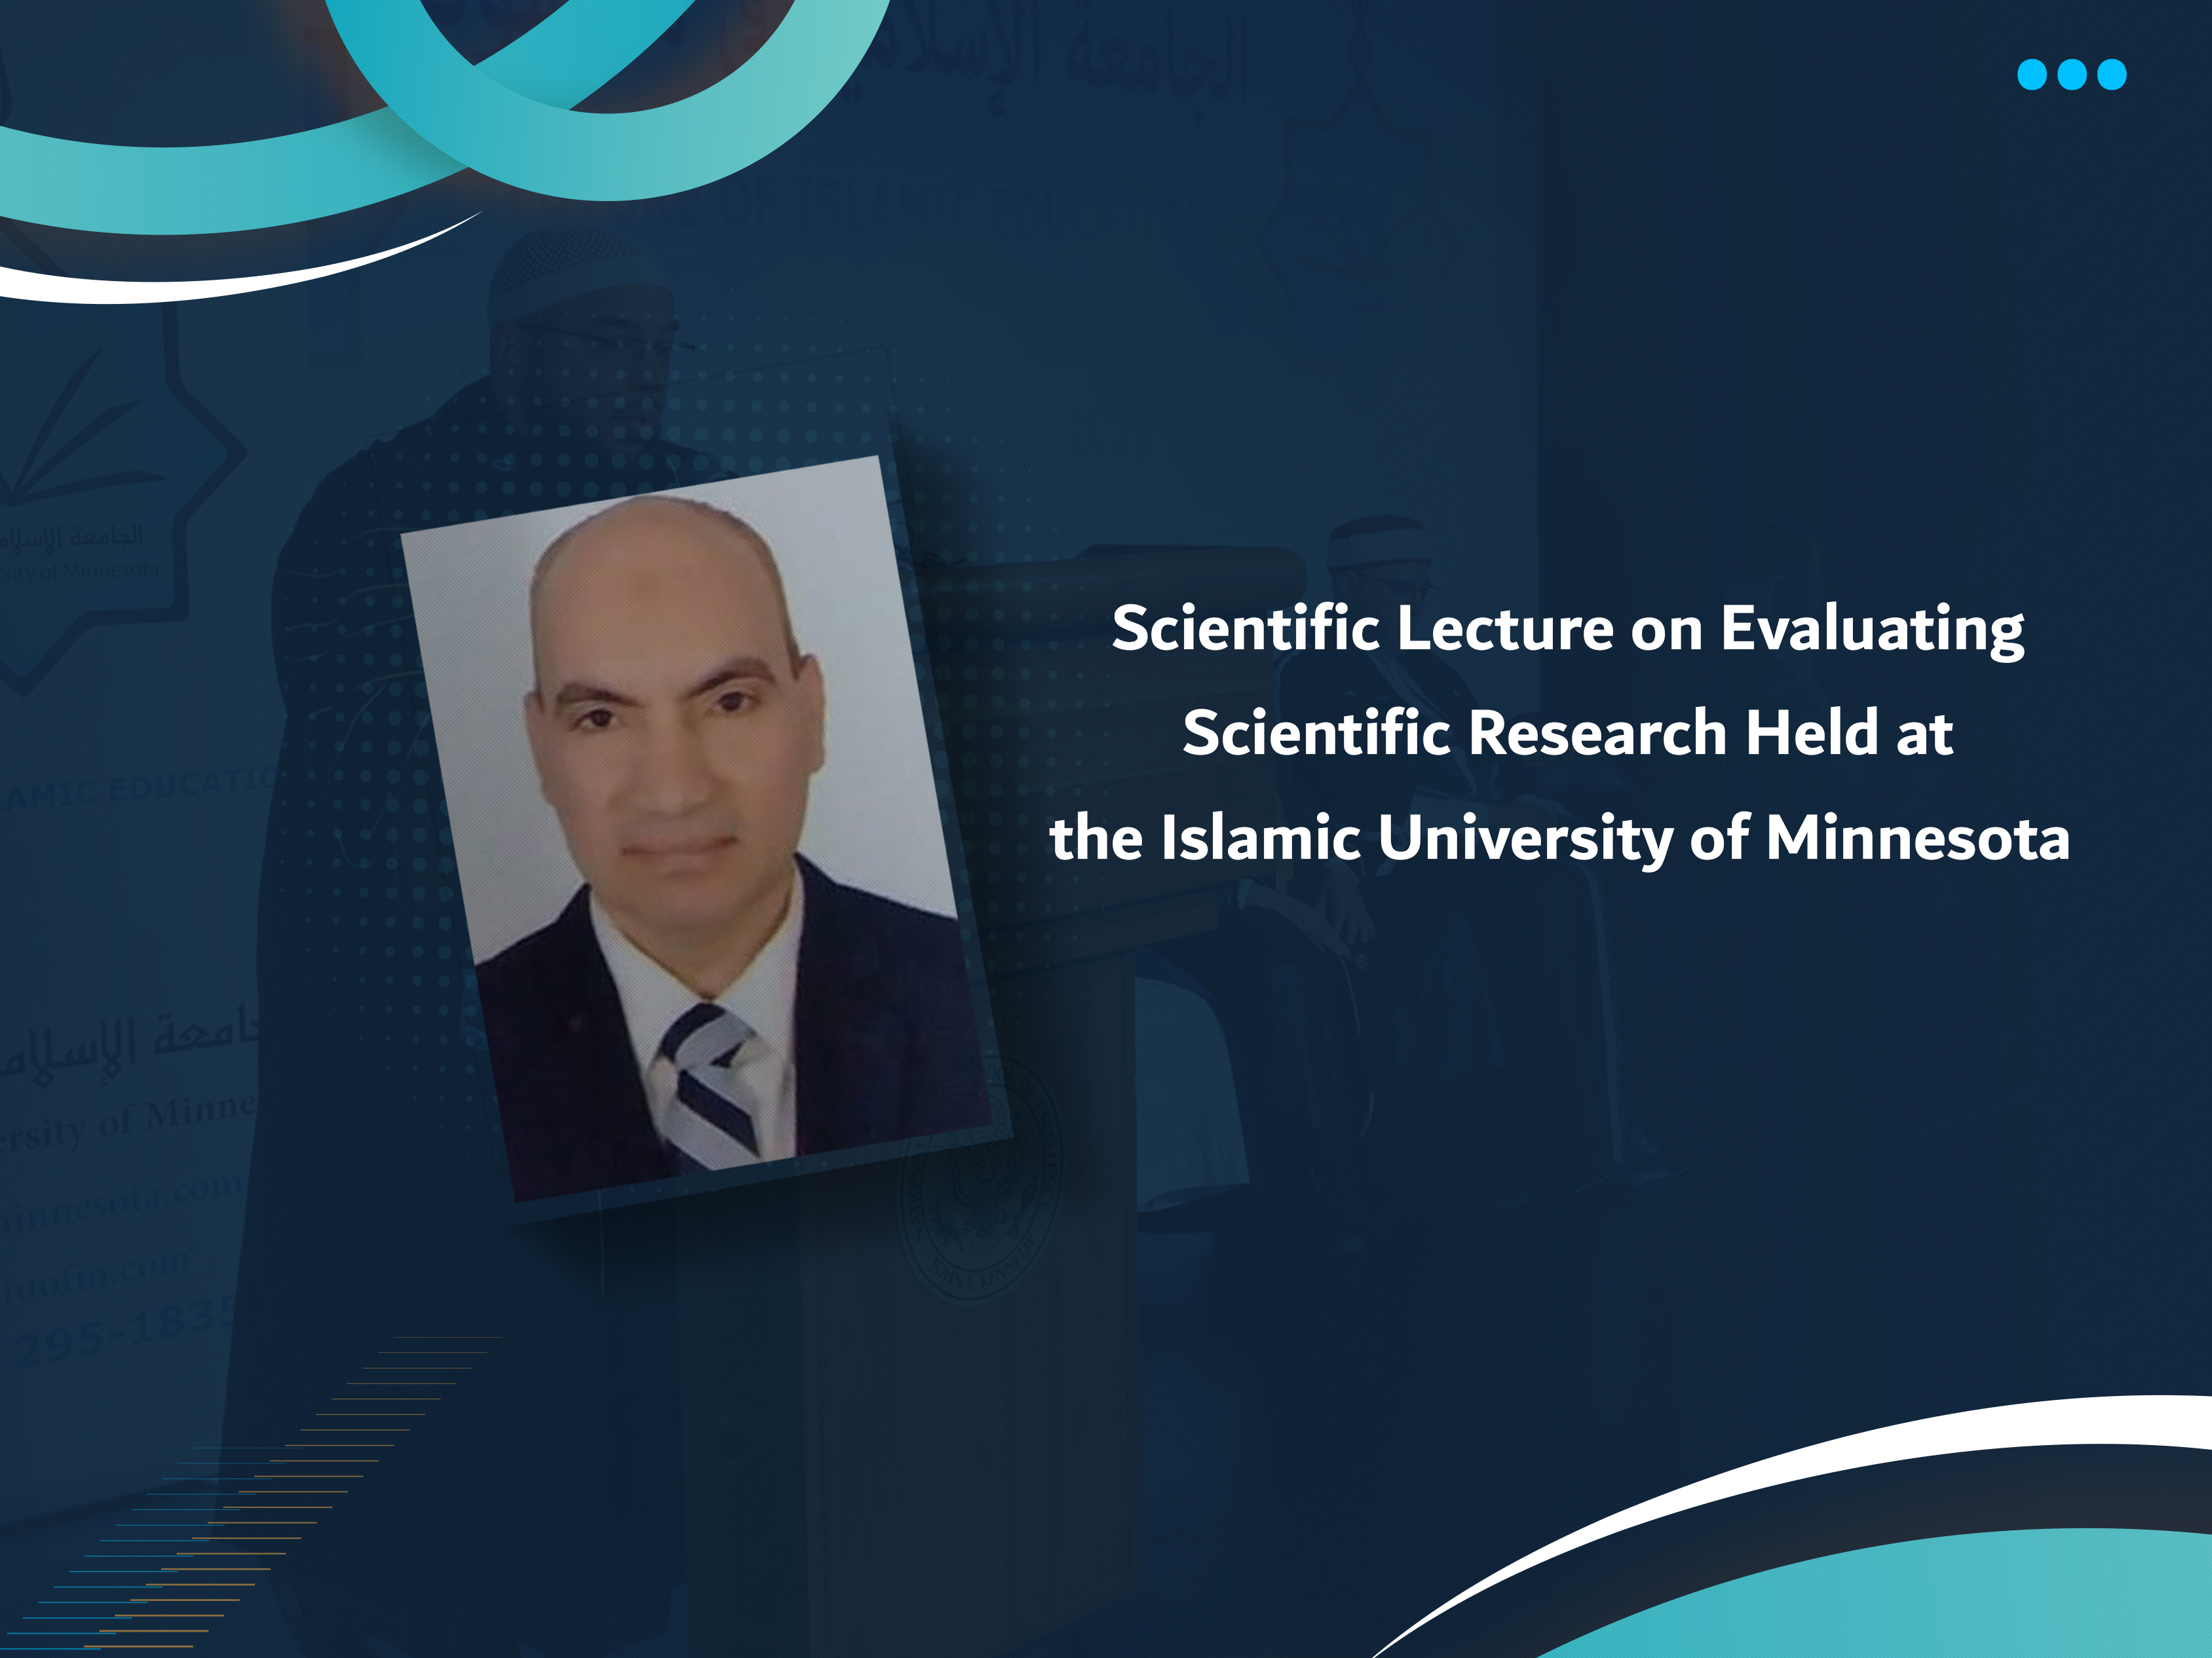 Scientific Lecture on Evaluating Scientific Research Held at the Islamic University of Minnesota